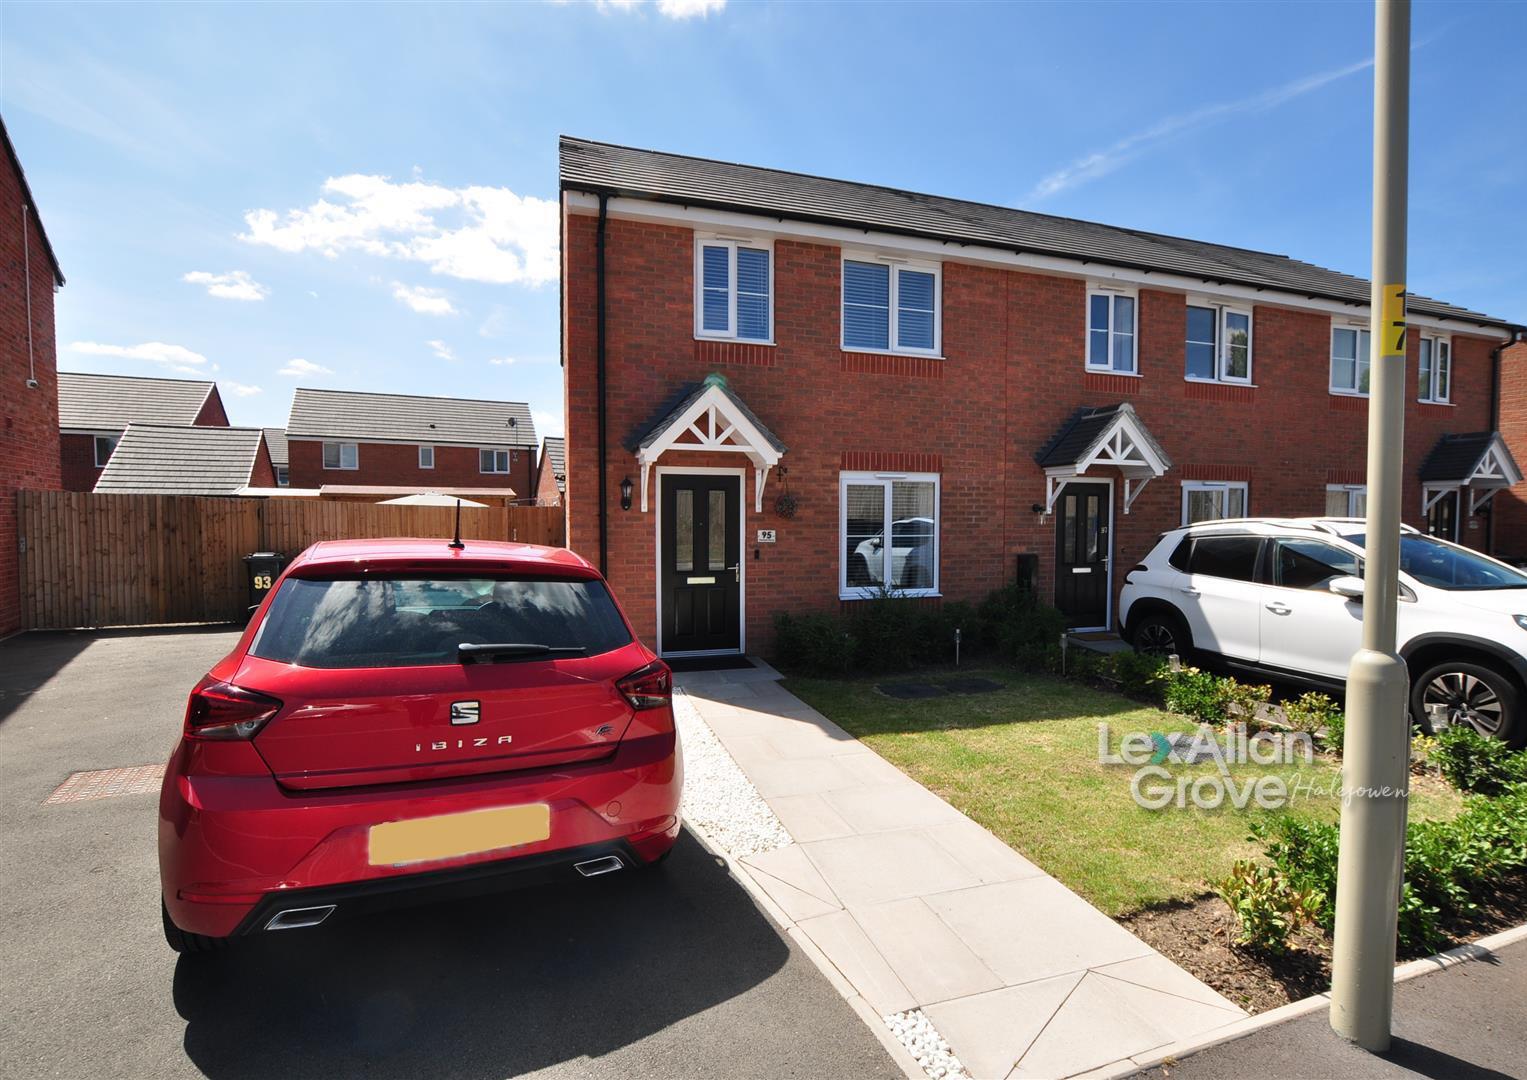 2 bed  for sale in Thomson Grove, Halesowen, B62 